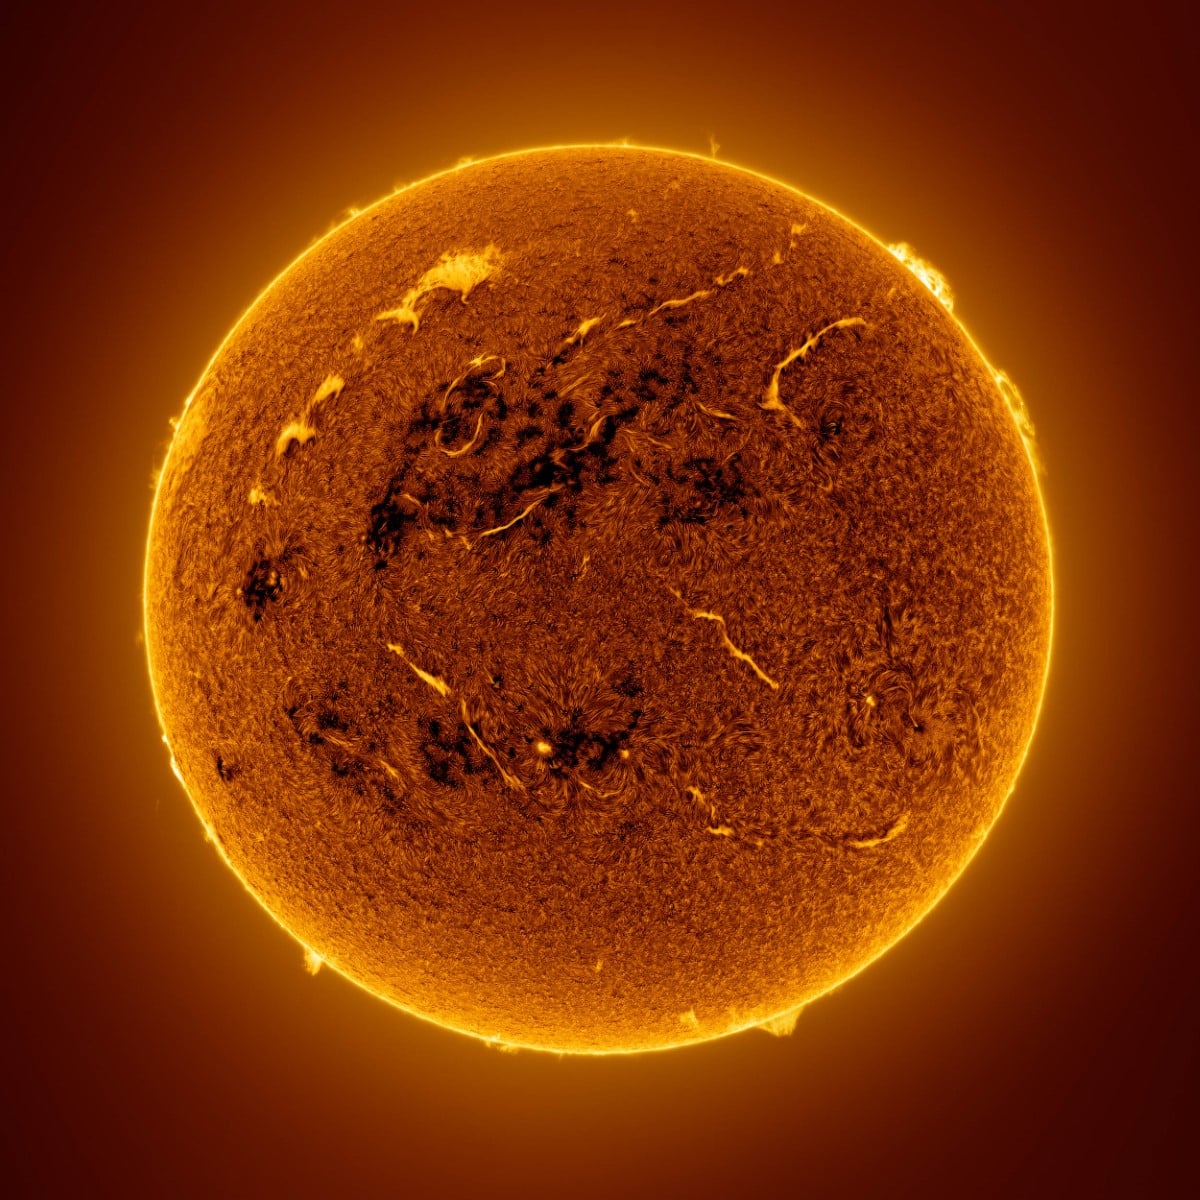 Detailed image of the sun